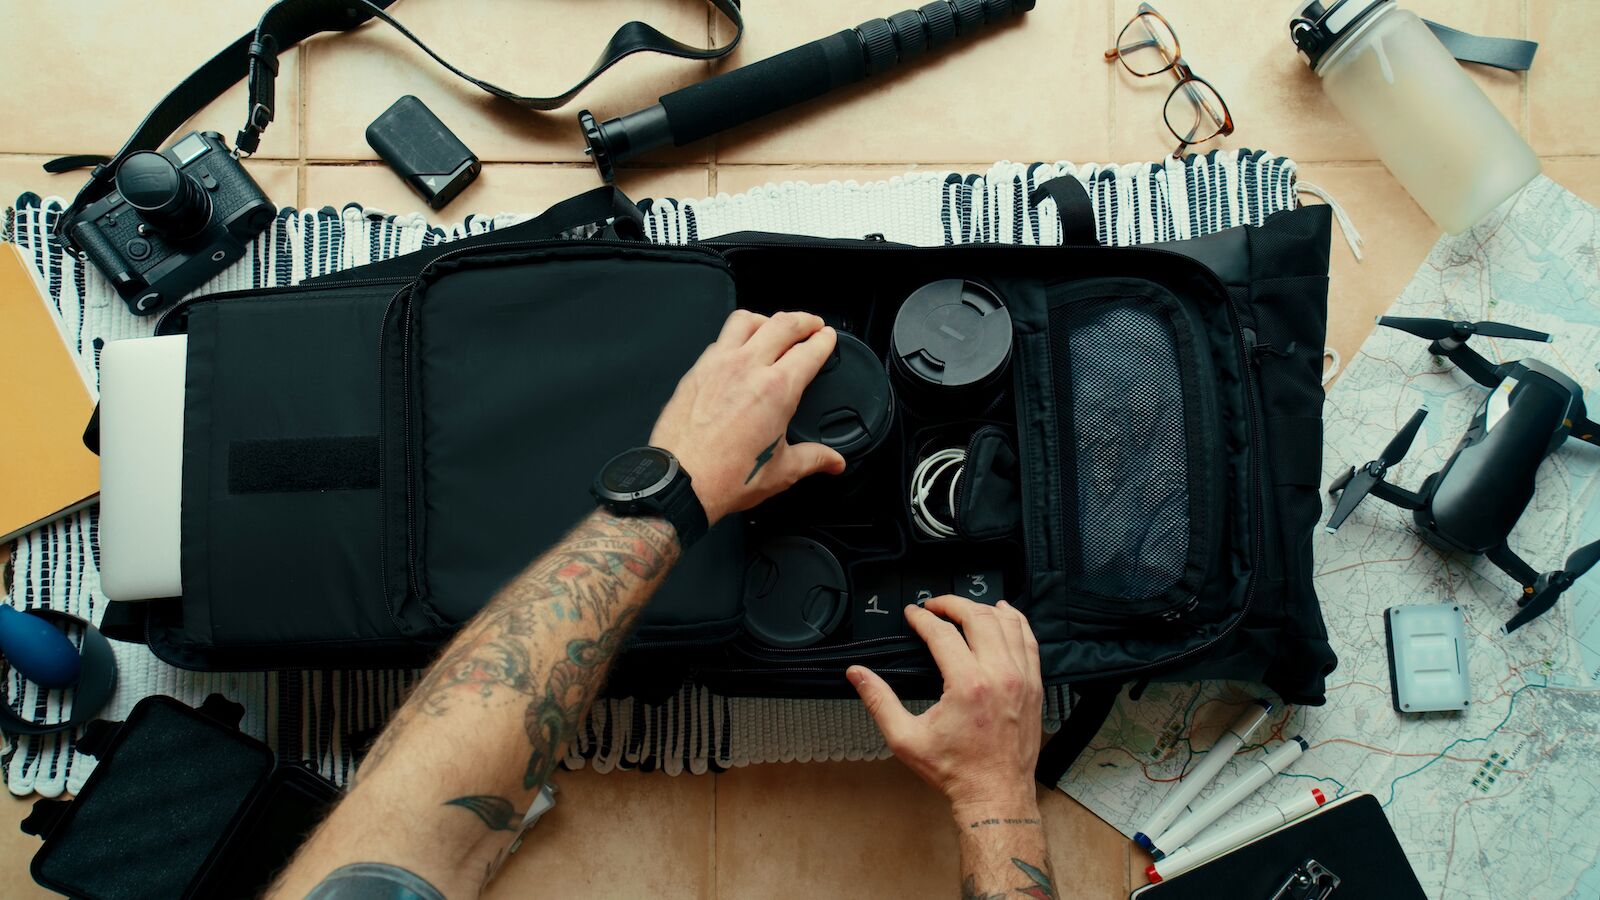 Professional photographer packing their camera gear with caution to keep their valuables safe when traveling